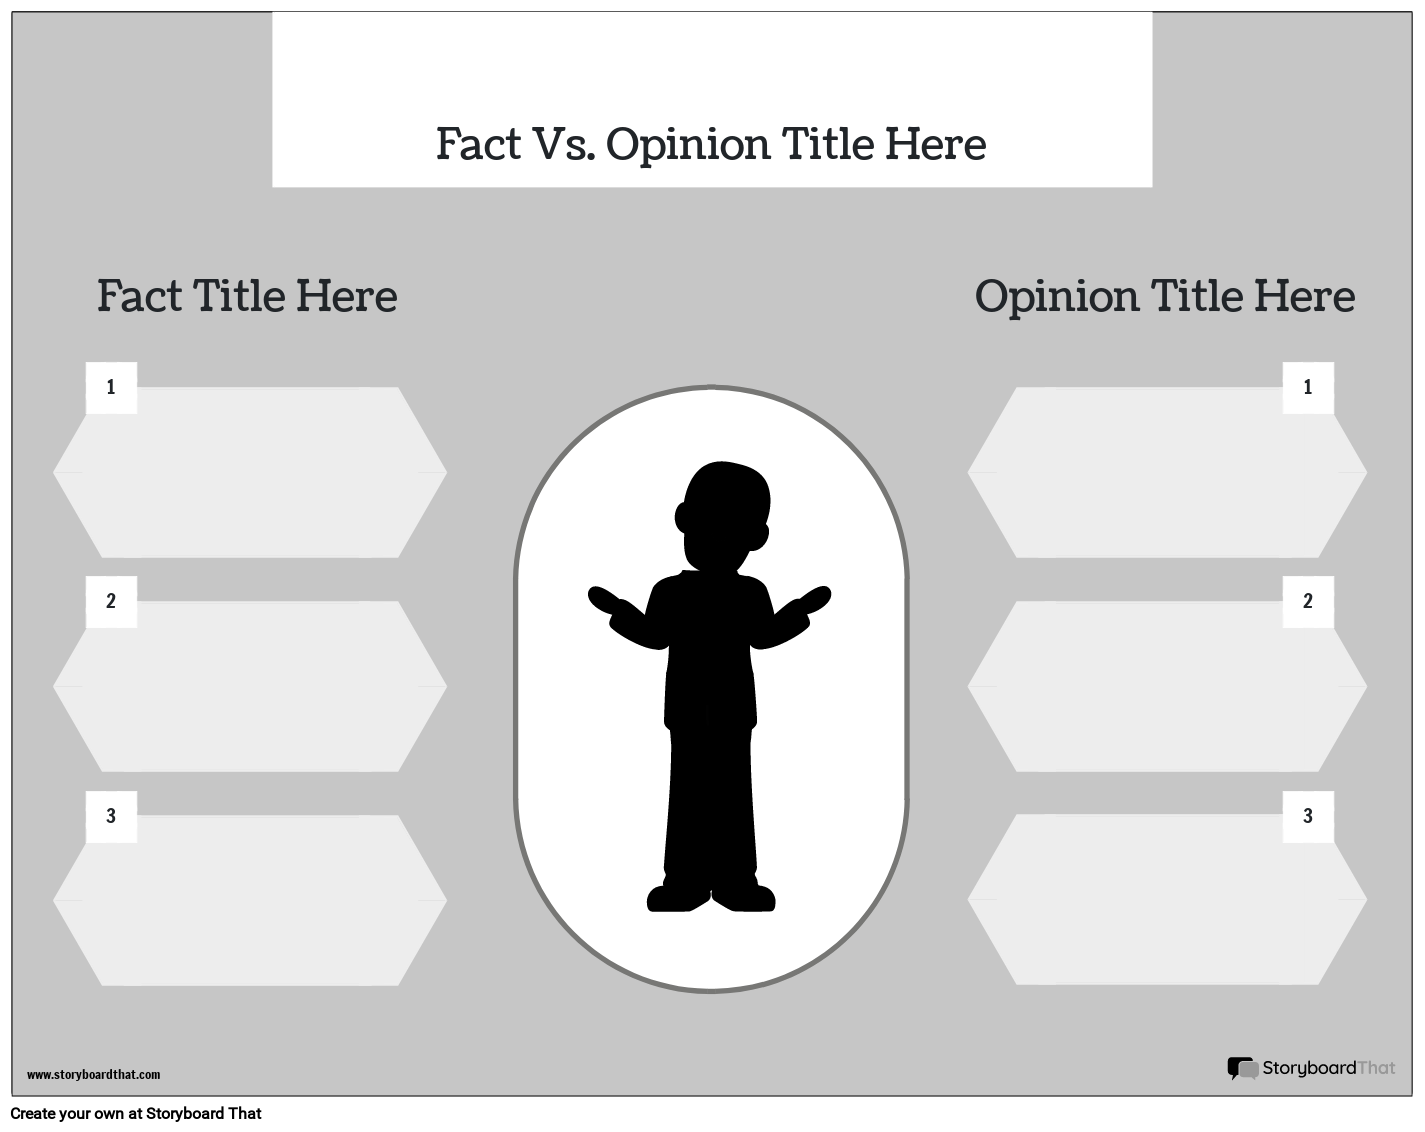 New Create Page Fact vs. Opinion Template 4 (Black & White)